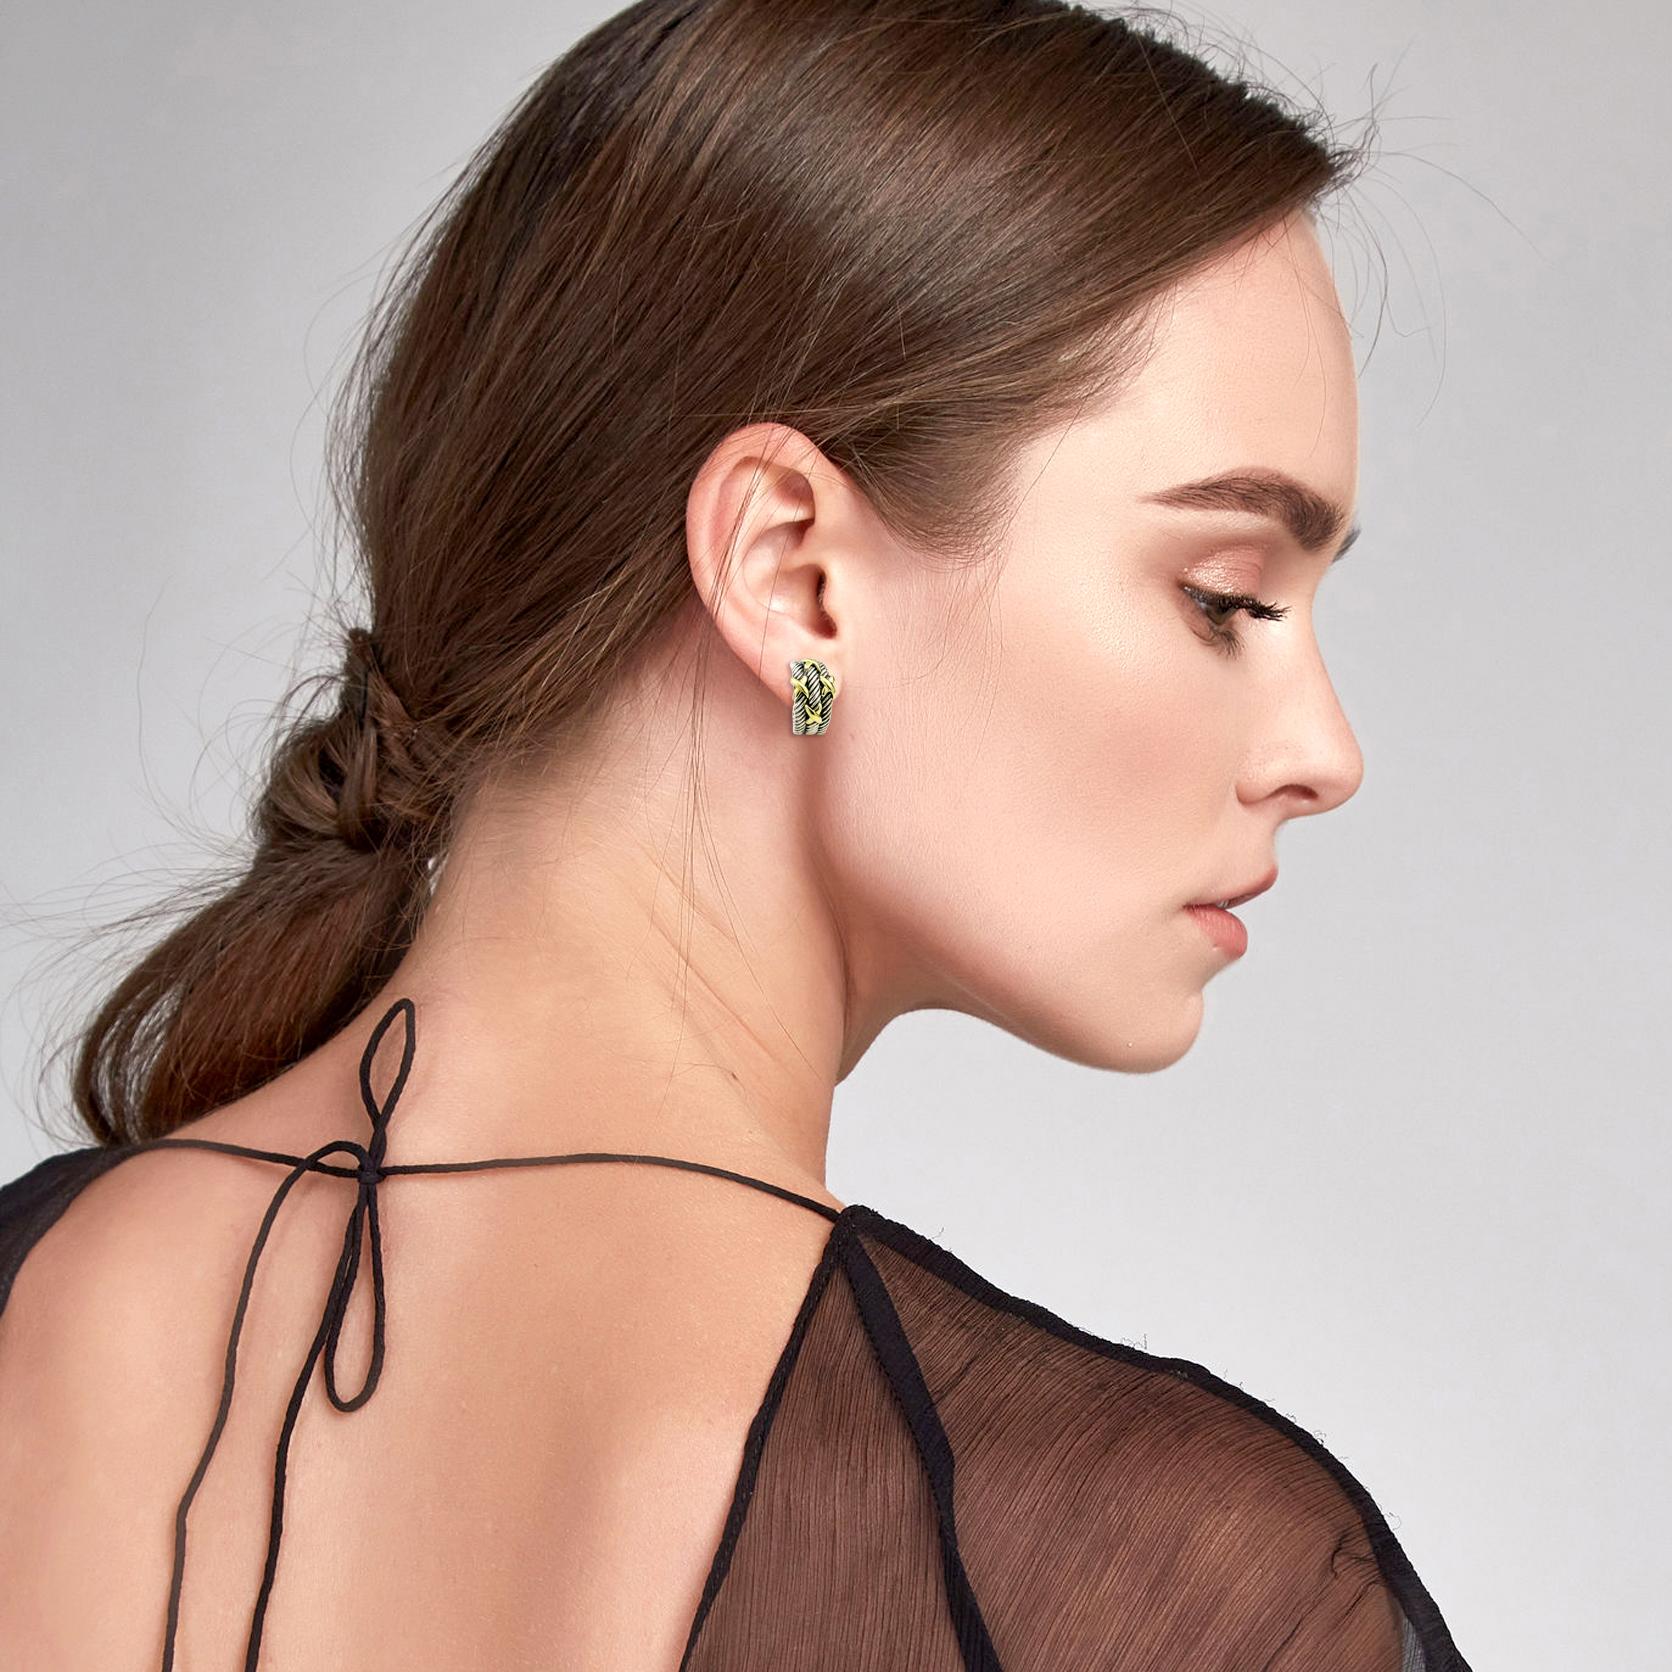 David Yurman cable classics x medium hoop earrings crafted in sterling silver with 14k yellow gold. Butterfly backs.